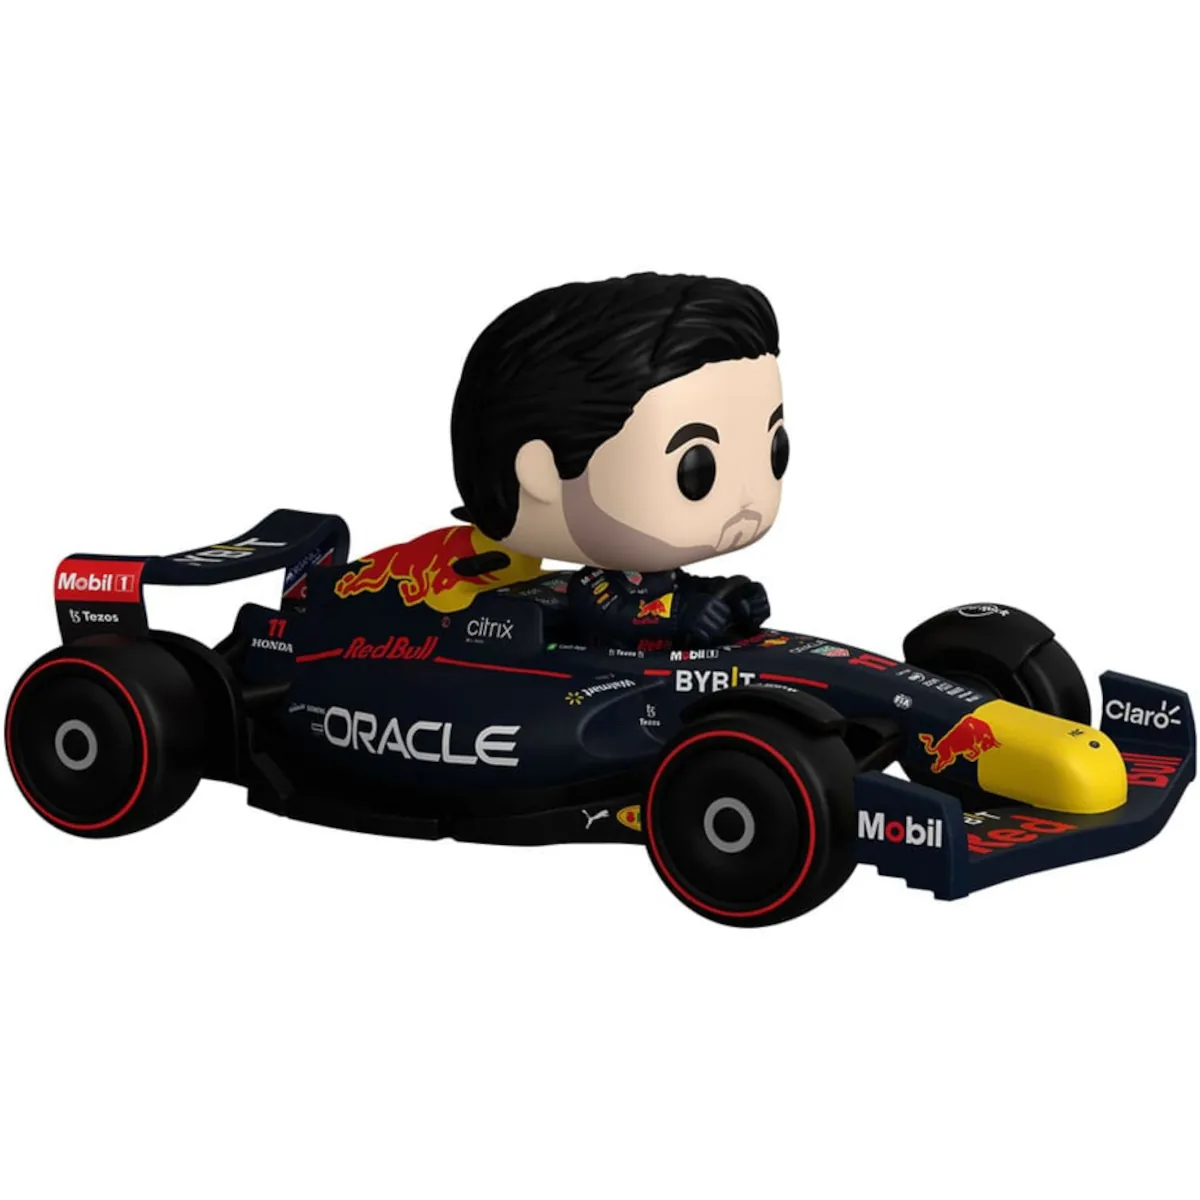 Funko Pop Rides Super Deluxe Oracle Red Bull Racing Sergio Perez Car Collectable Vinyl Figure